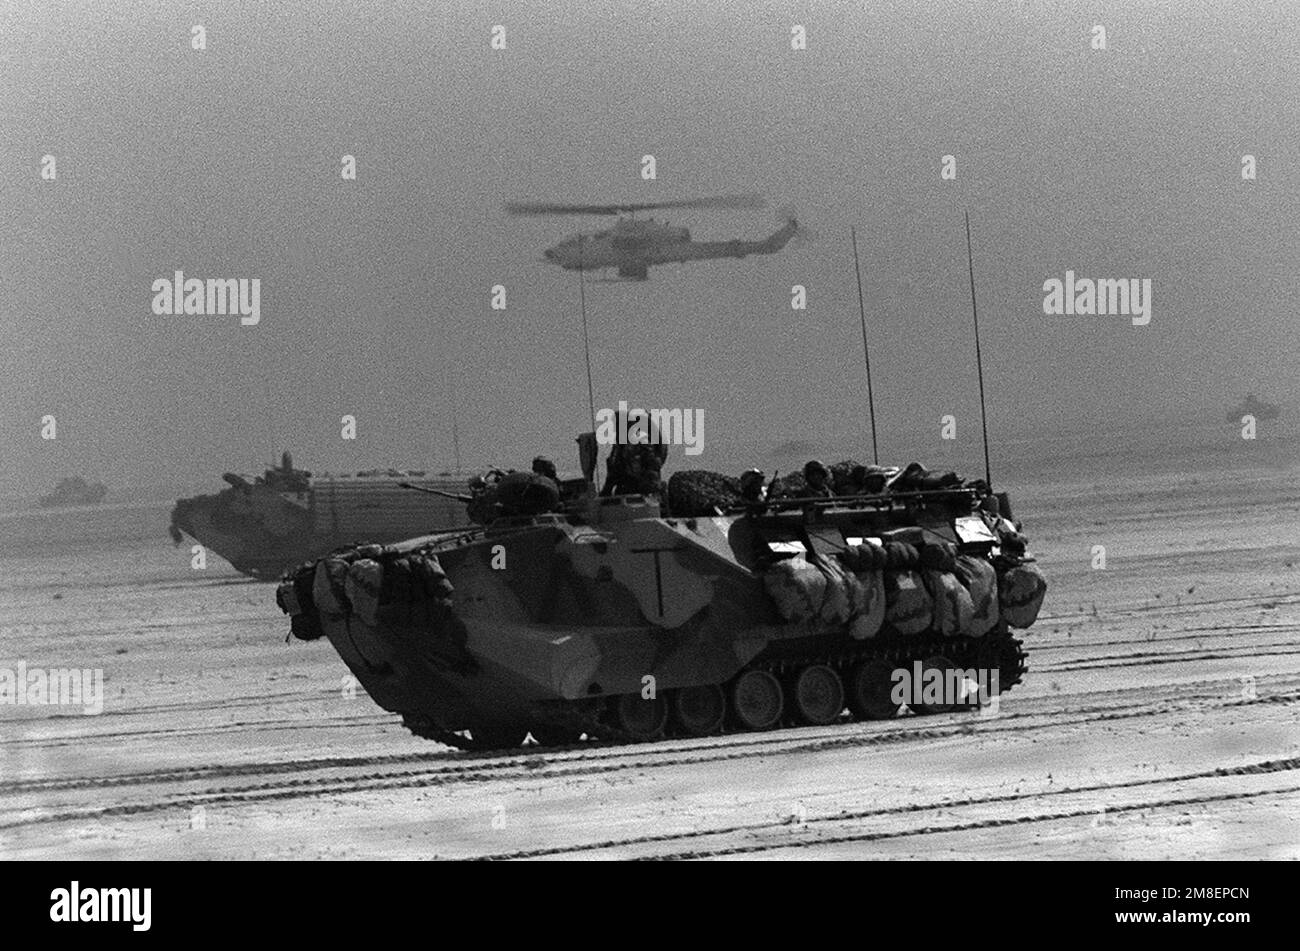 AAV-7A1 amphibious assault vehicles of the 1ST Combat Engineer Battalion (CEB), 1ST Marine Division, advance toward Kuwait City during the third day of the ground offensive phase of Operation Desert Storm. An AH-1 Sea Cobra helicopter is flying in the background. Subject Operation/Series: DESERT STORM Country: Kuwait (KWT) Stock Photo